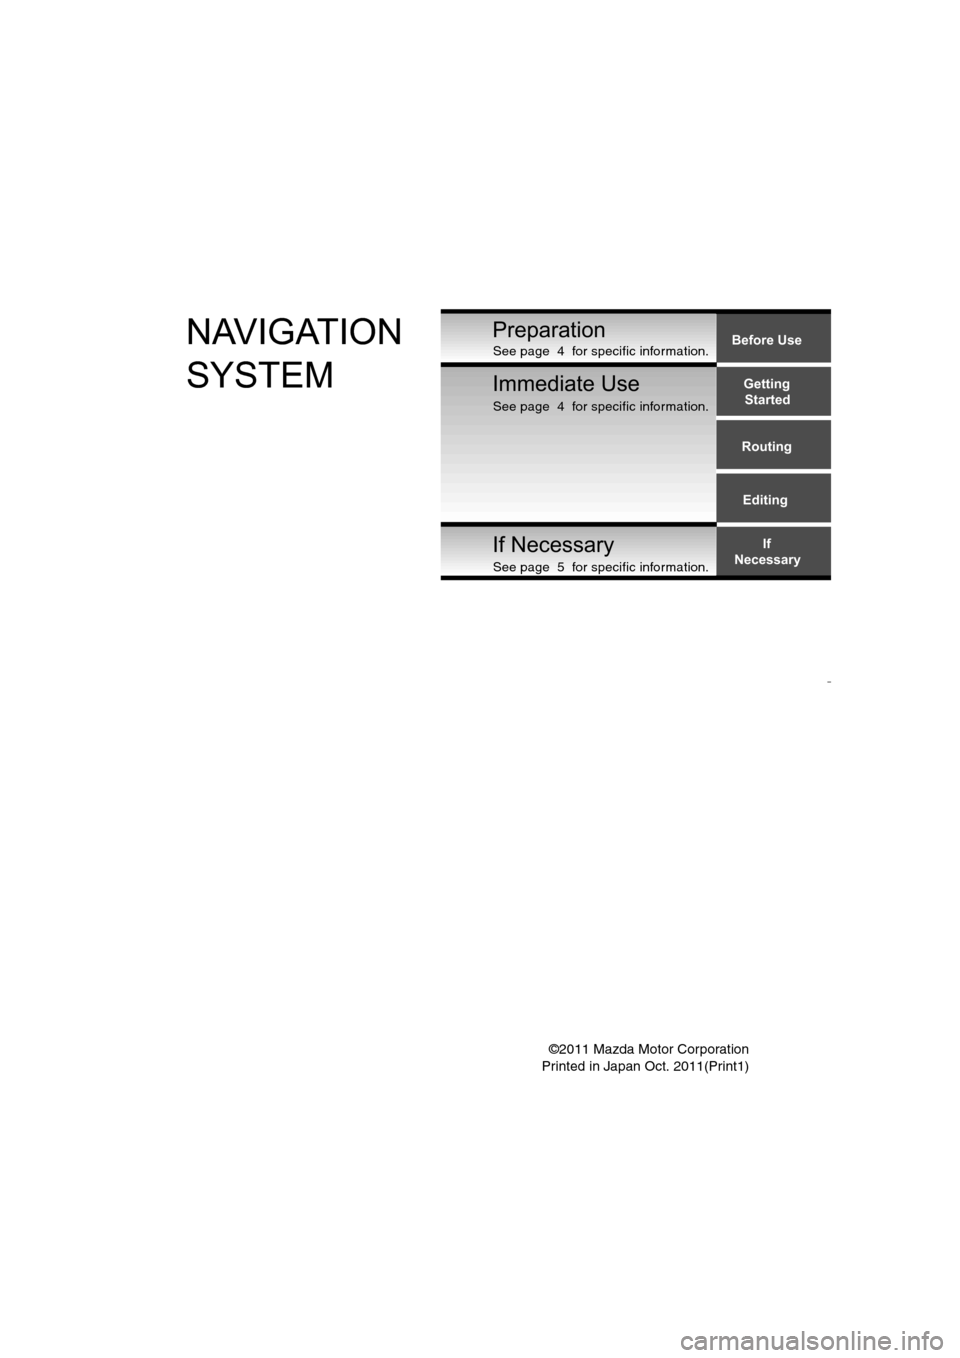 MAZDA MODEL CX-7 2012  Navigation Manual (in English) ©2011 Mazda Motor Corporation
Printed in Japan Oct. 2011(Print1)
Before Use
GettingStarted
Routing
Editing If
NecessaryPreparationNAVIGATION 
SYSTEM
Immediate Use
If Necessary
See page  5  for specif